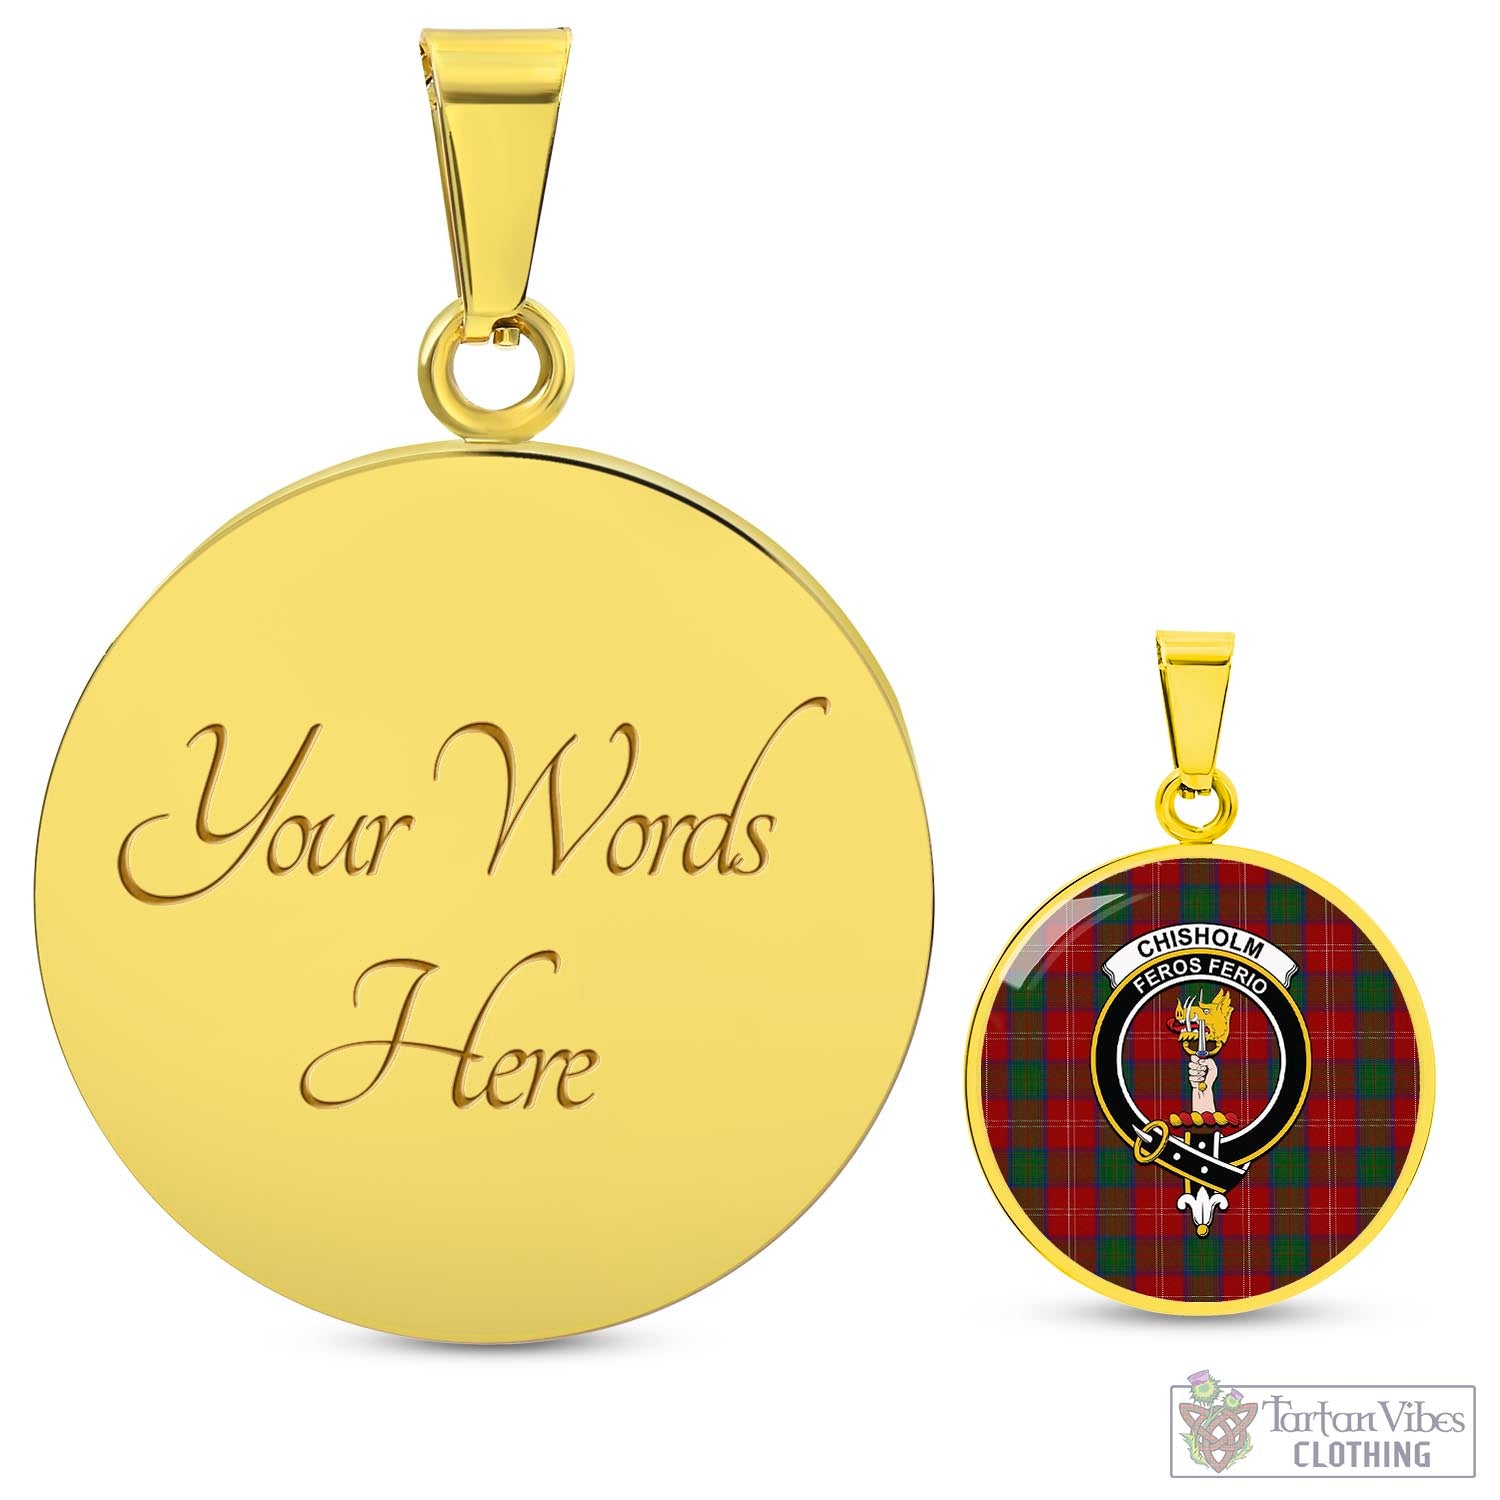 Tartan Vibes Clothing Chisholm Tartan Circle Necklace with Family Crest